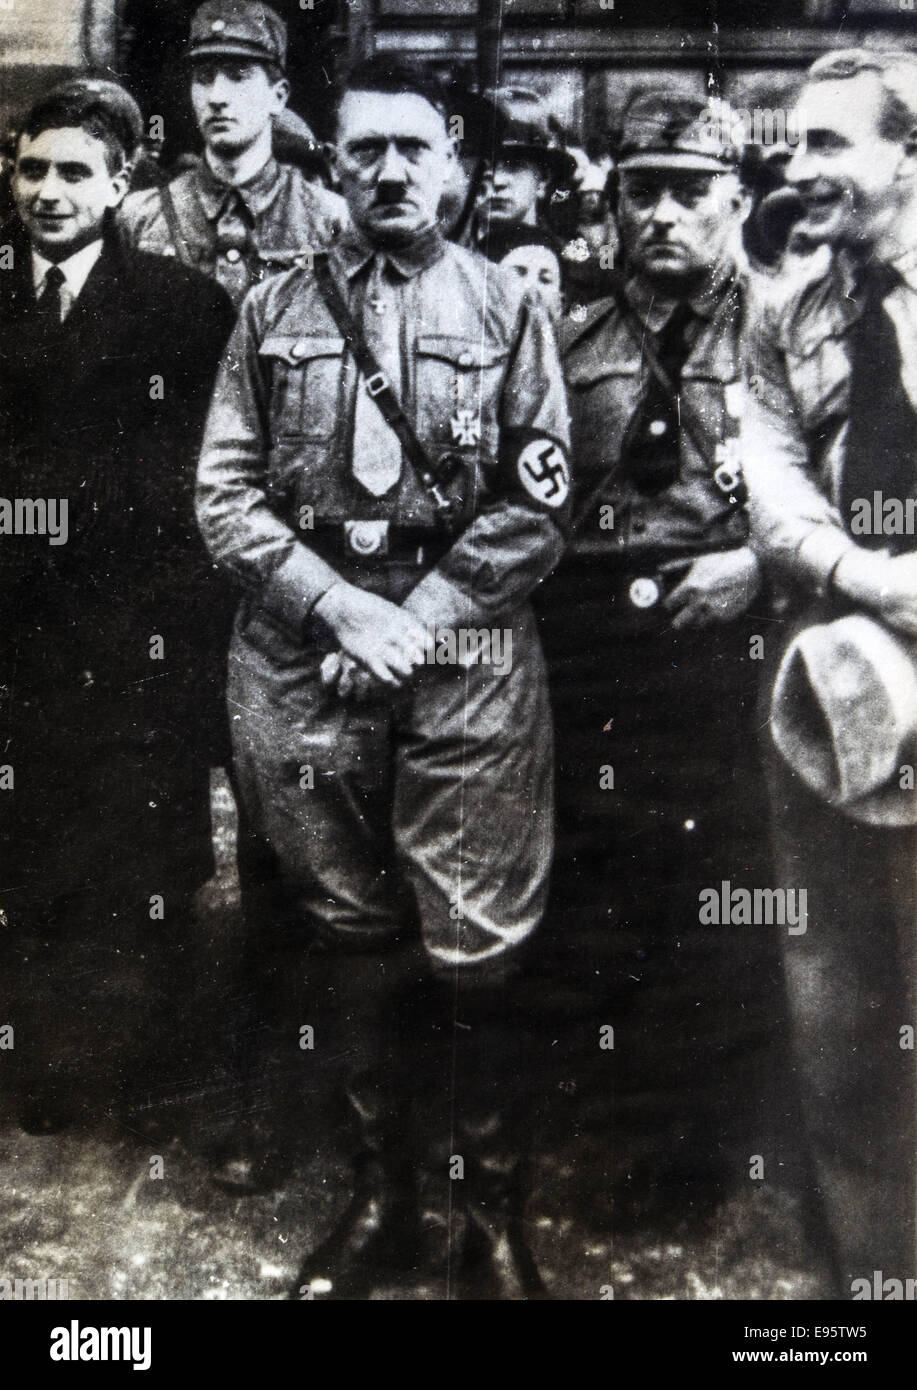 Oct. 11, 2014 - Leader of the National Socialists and later Imperial Chancellor Adolf Hitler (m) in Braunschweig in 1931. Reproduction of antique photo © Igor Golovniov/ZUMA Wire/ZUMAPRESS.com/Alamy Live News Stock Photo